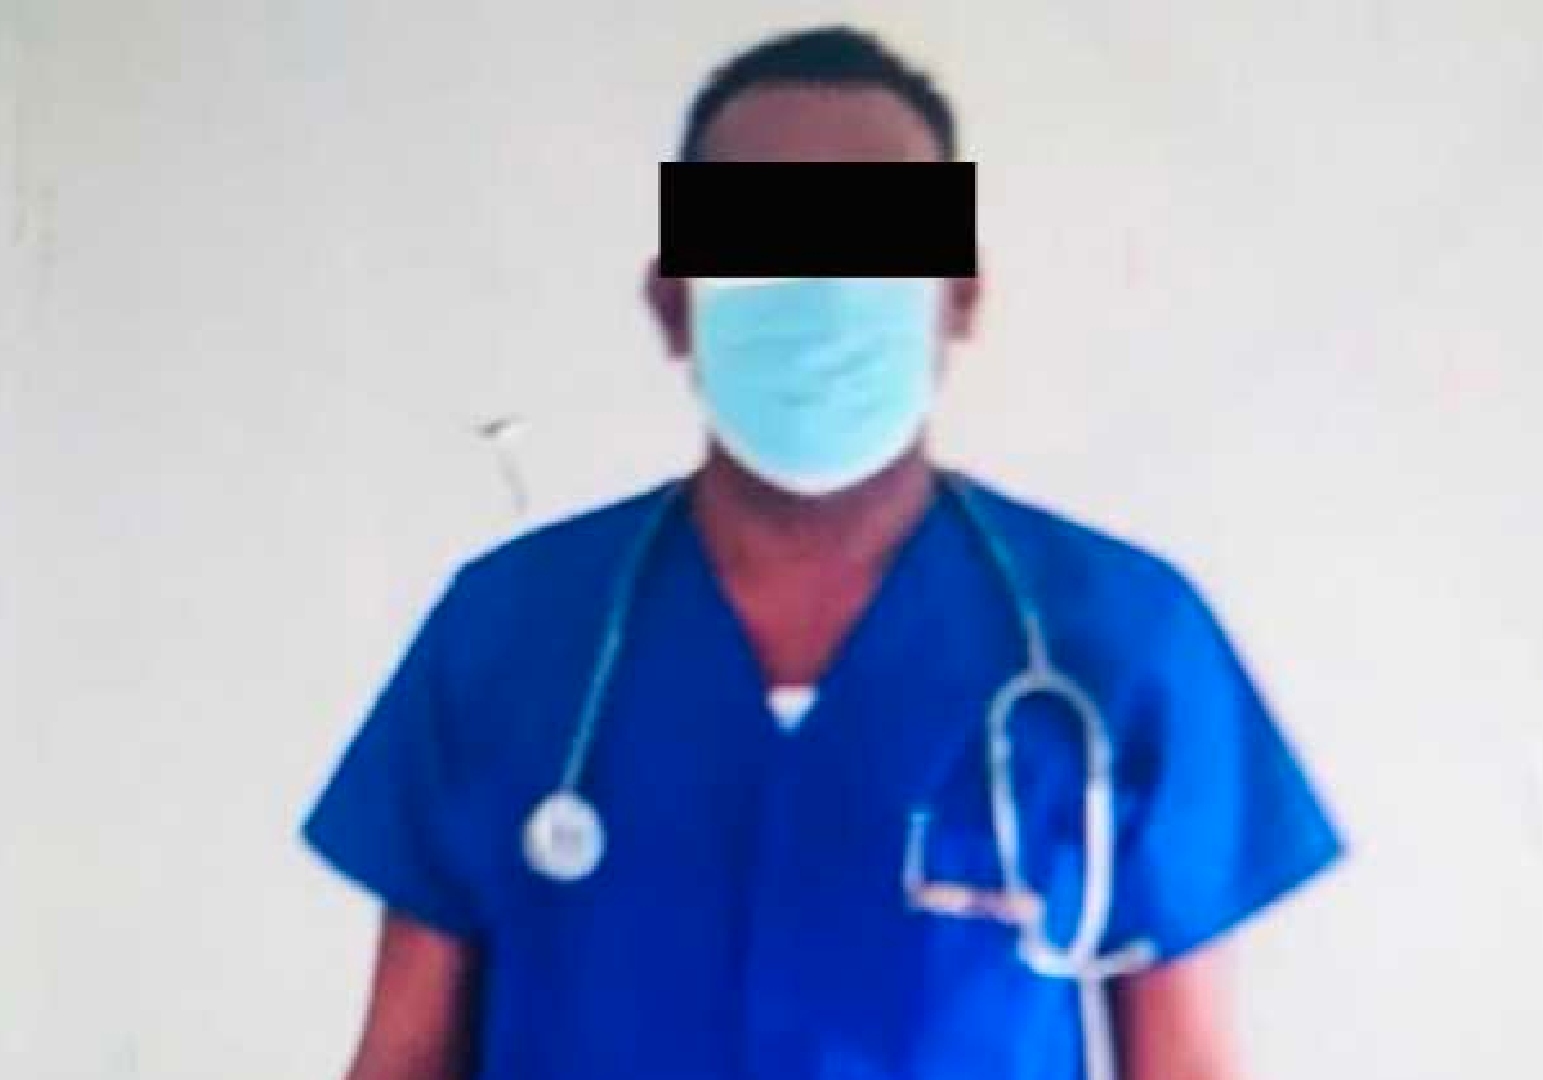 Man arrested for defrauding people while posing as doctor